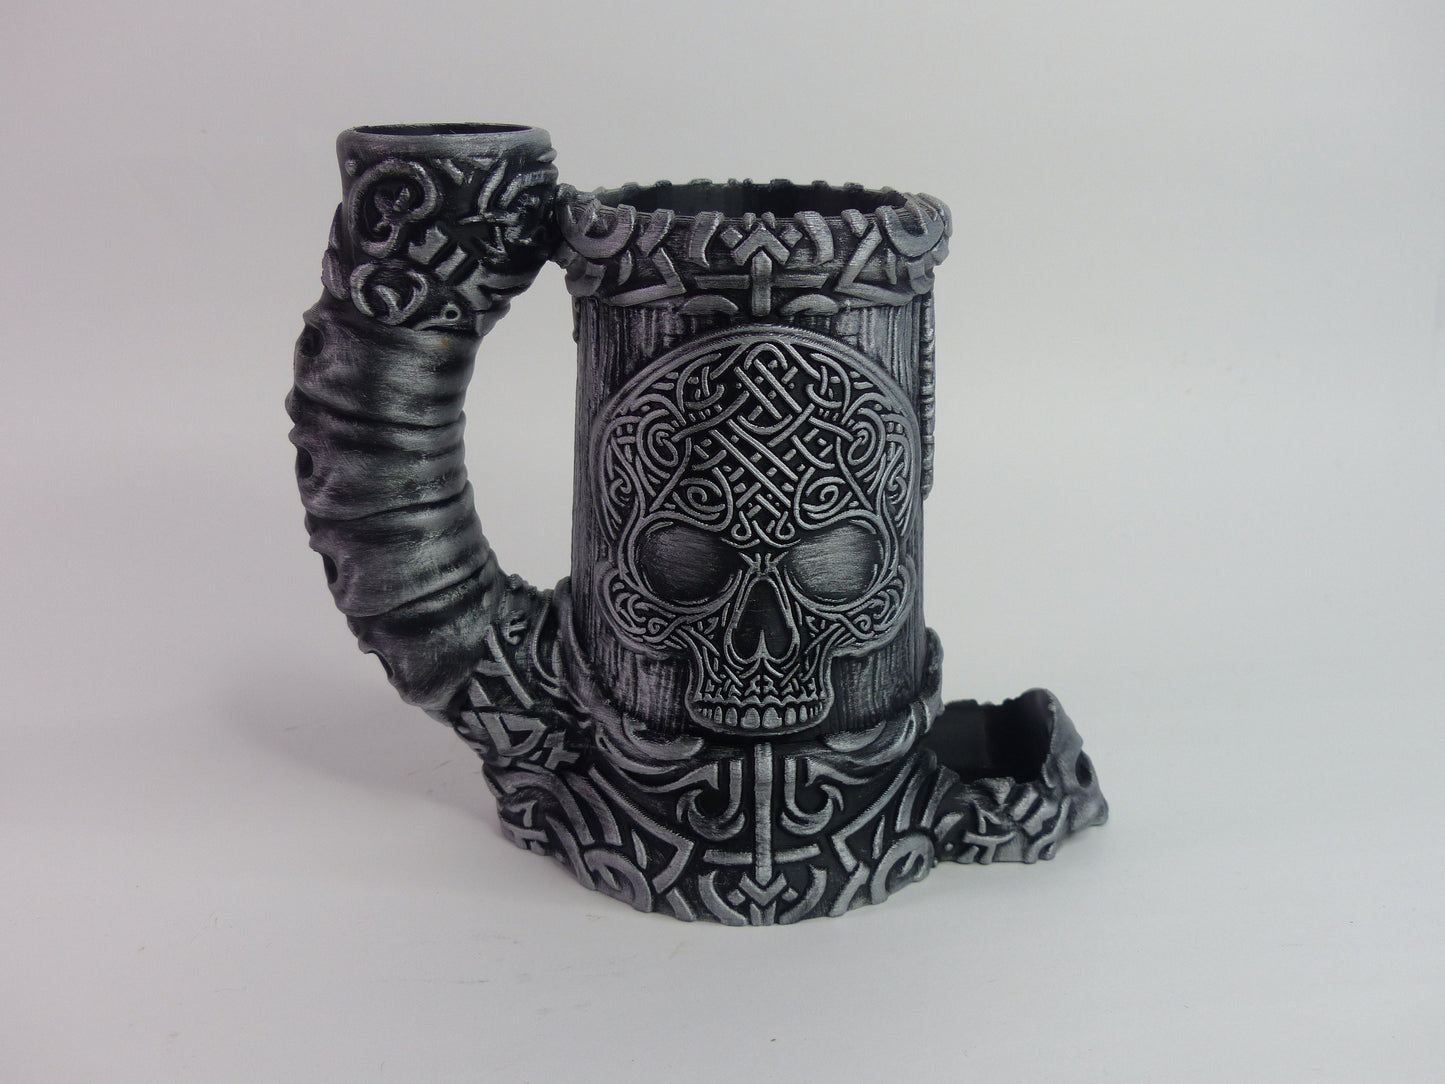 Celtic Skull Can Cosy/Cozy DnD Dice Tower - 3D printed and hand painted - Can be personalised!